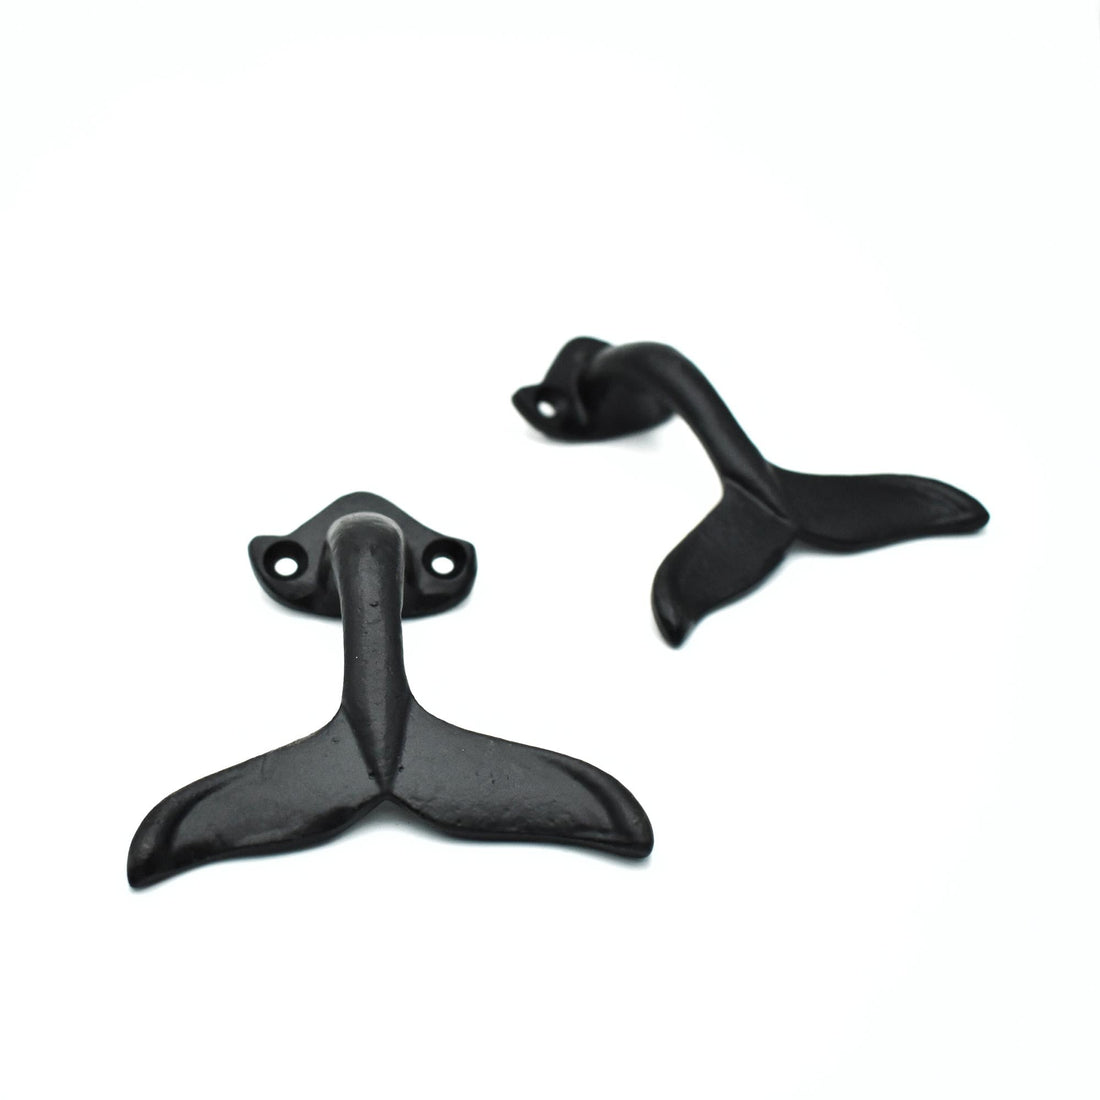 Orca fin Coat Wall Hook and Hanger